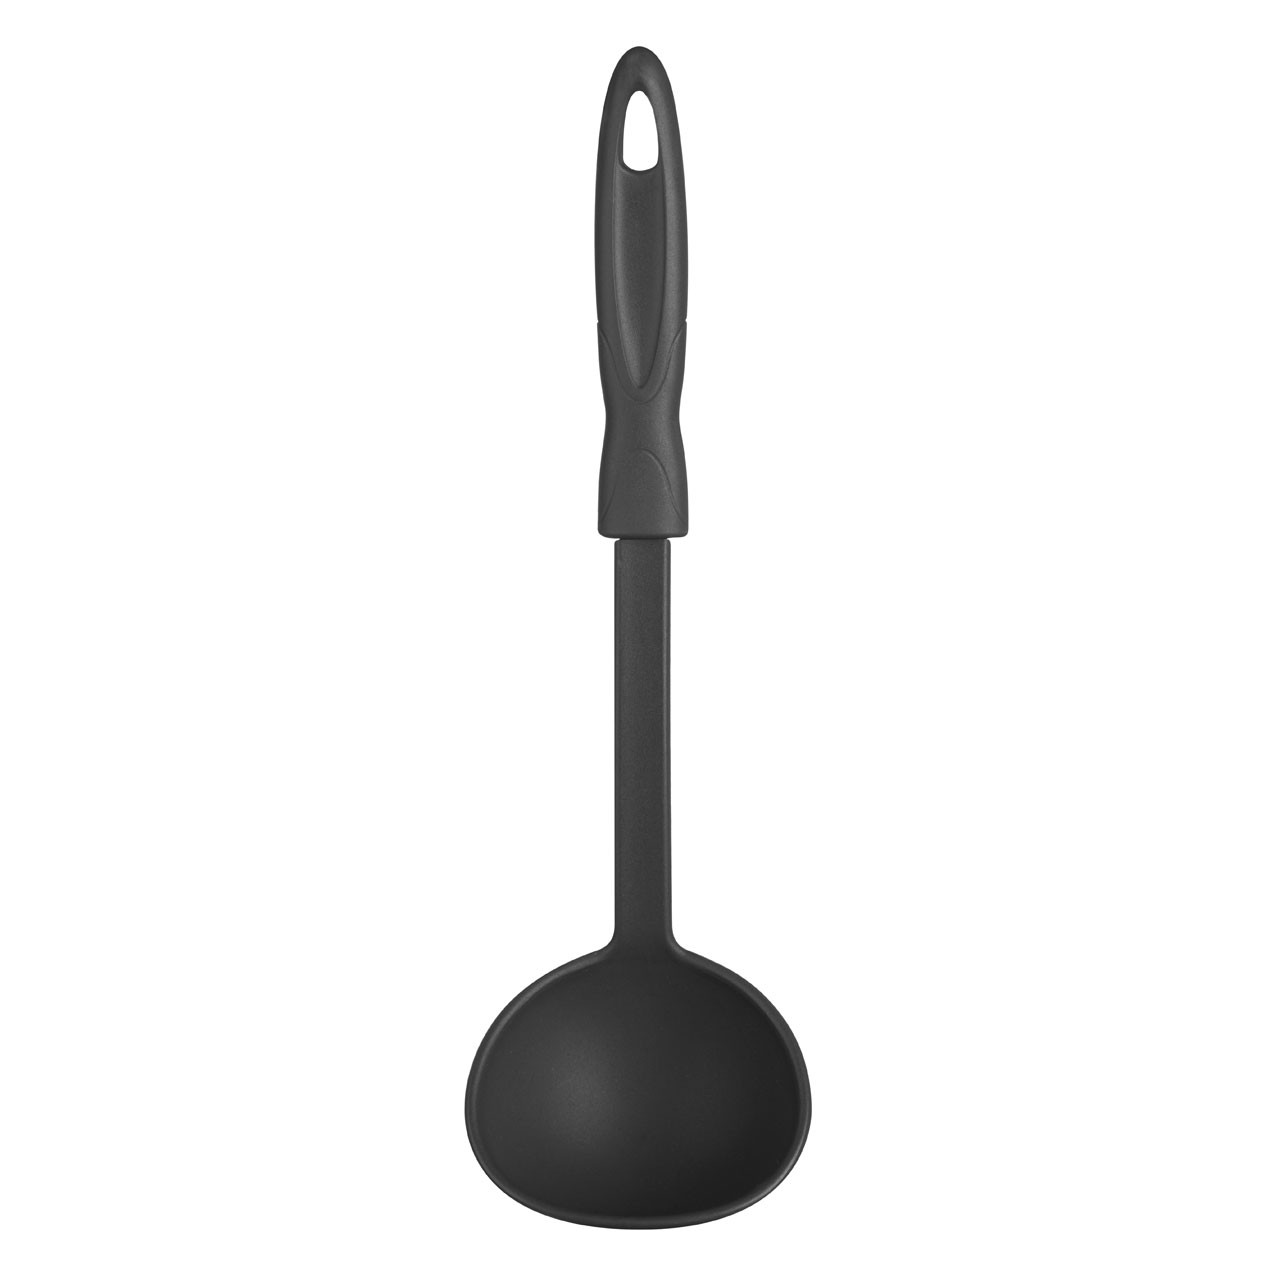 Ladle Ideal for mixing and serving your soups, sauces